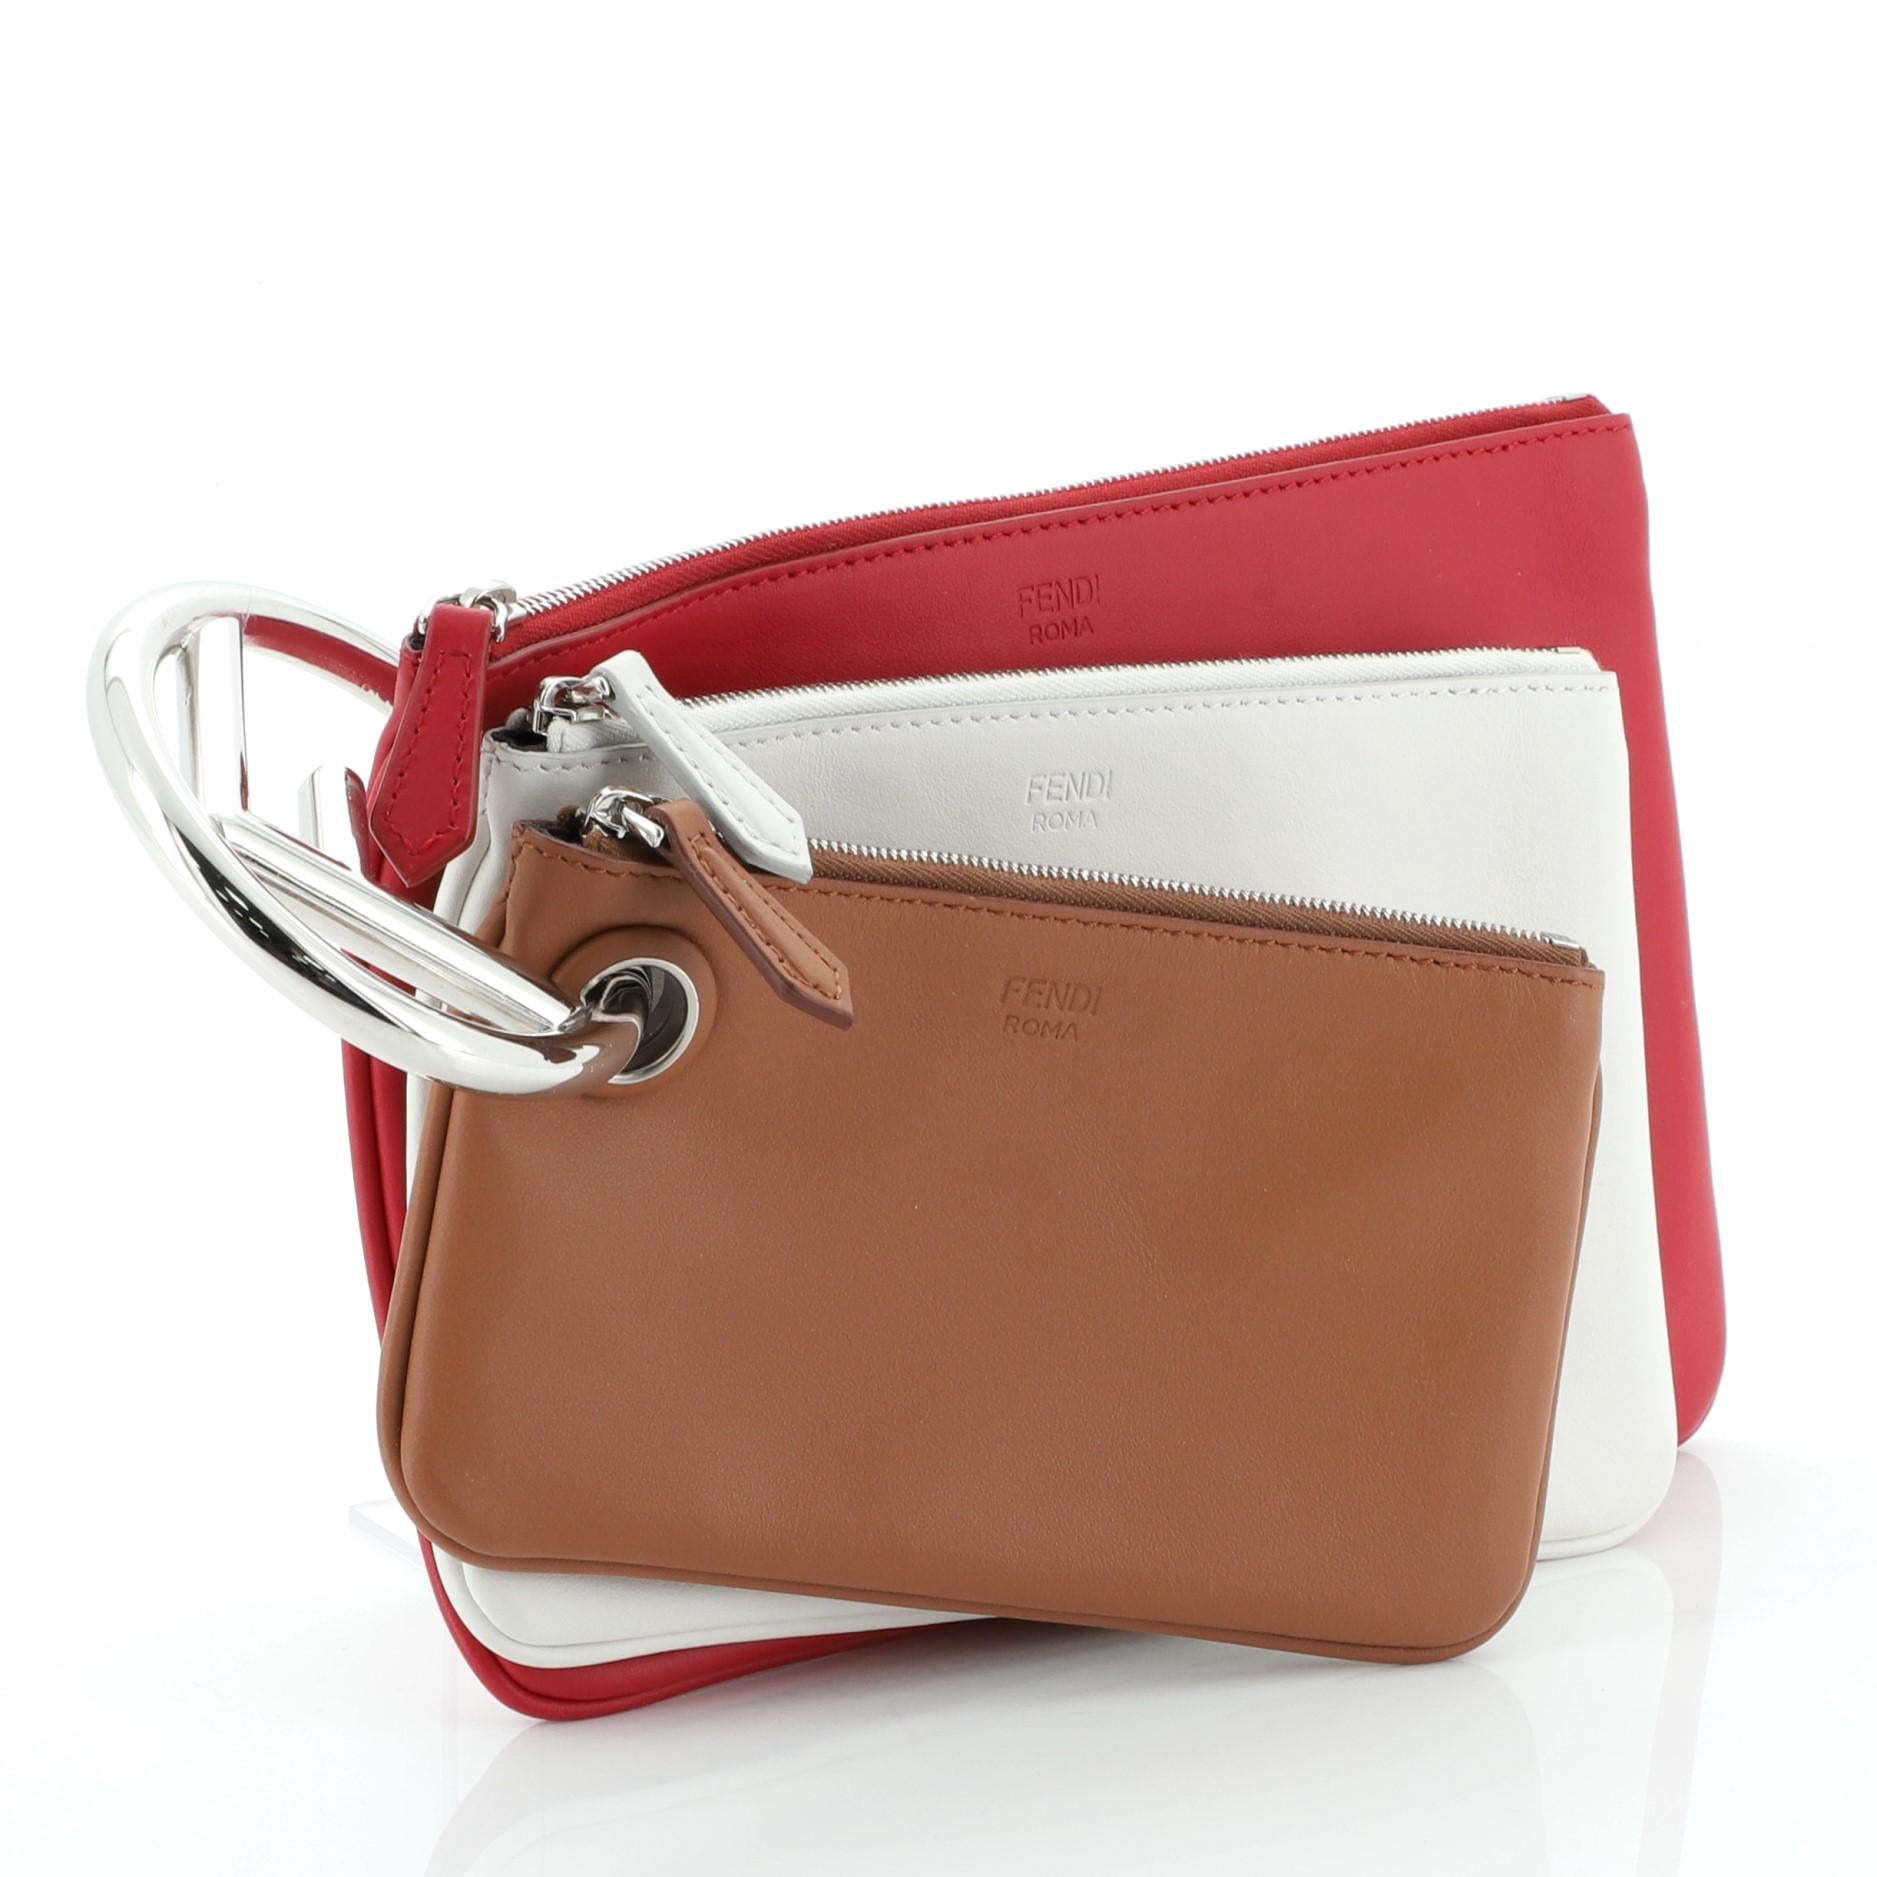 This Fendi Triplette Pouch Set Calfskin, crafted in red and multicolour calfskin leather, features a small, medium and large pouch, Fendi logo handle and silver-tone hardware. Its zip closure opens to a brown fabric interior. 

Estimated Retail